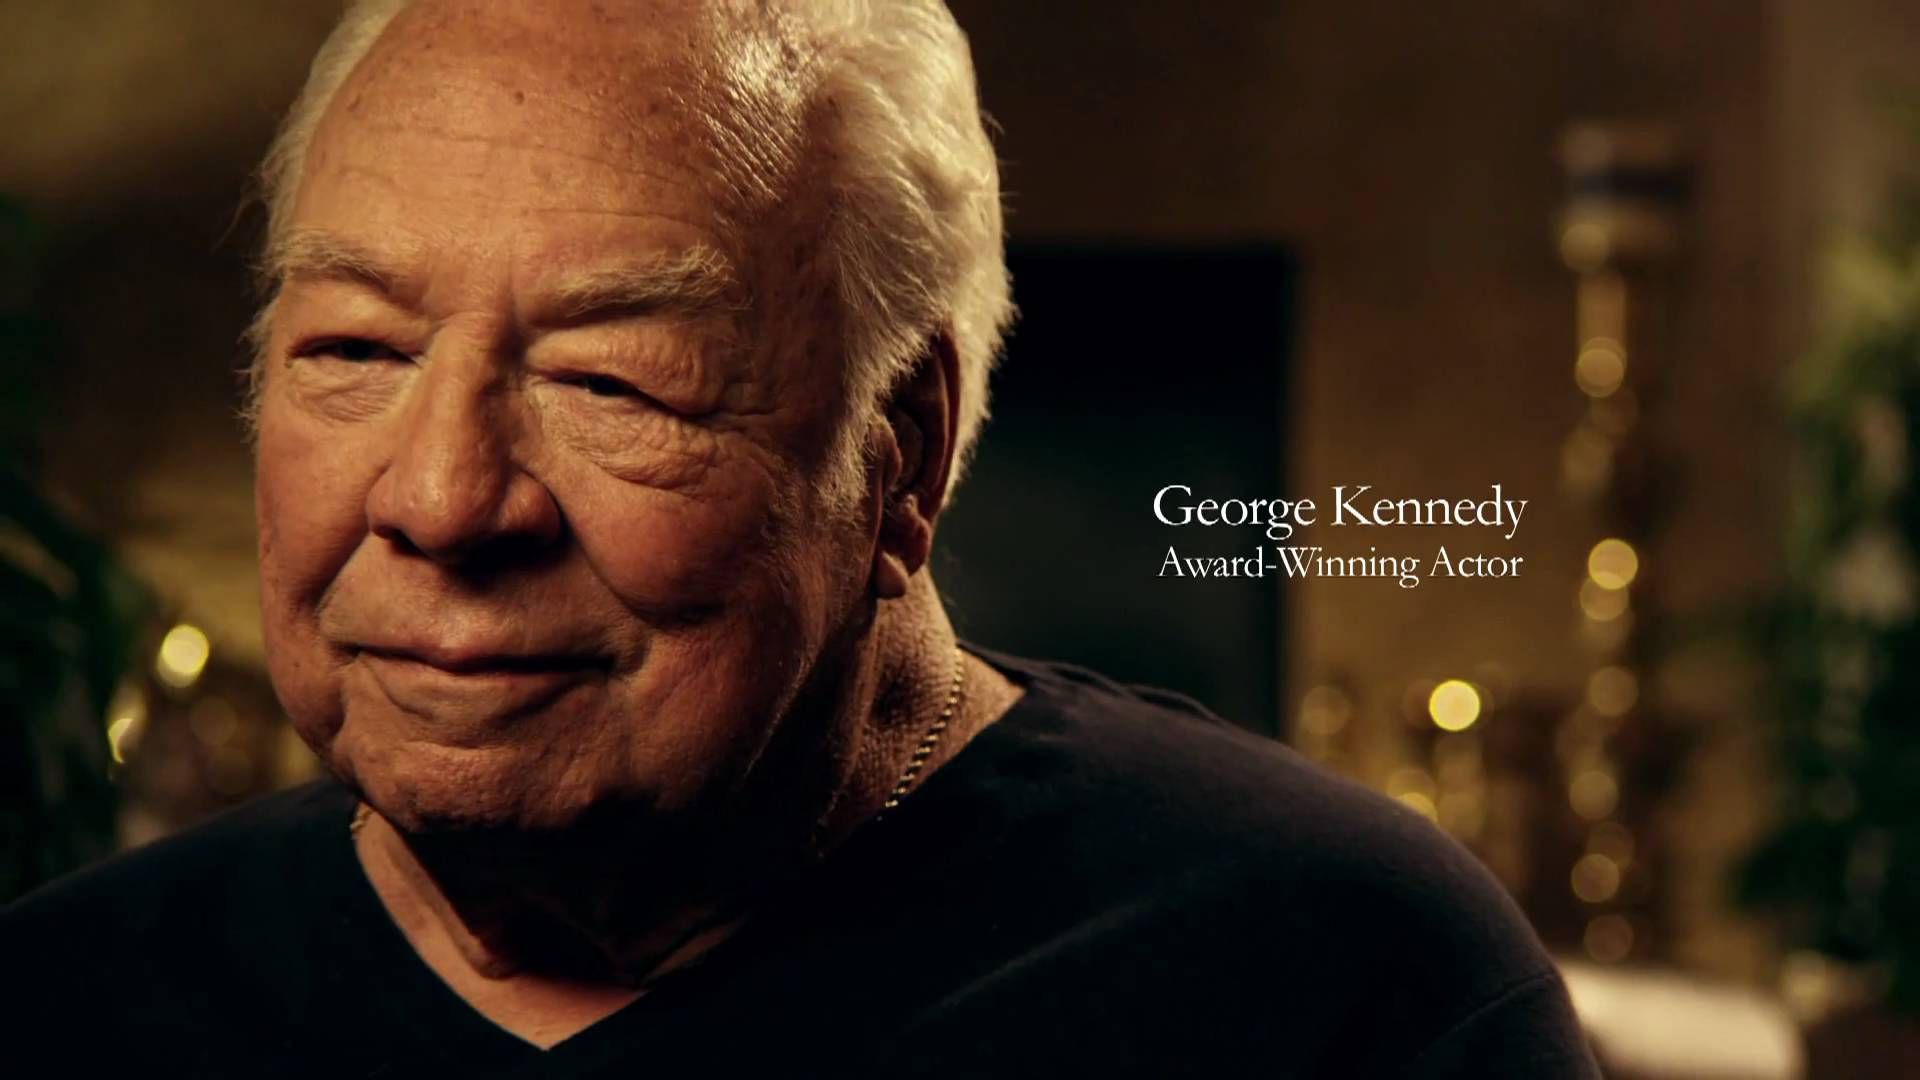 George Kennedy, Jr. - The Complete Guide to Hollywood’s Lost Stars in 2016